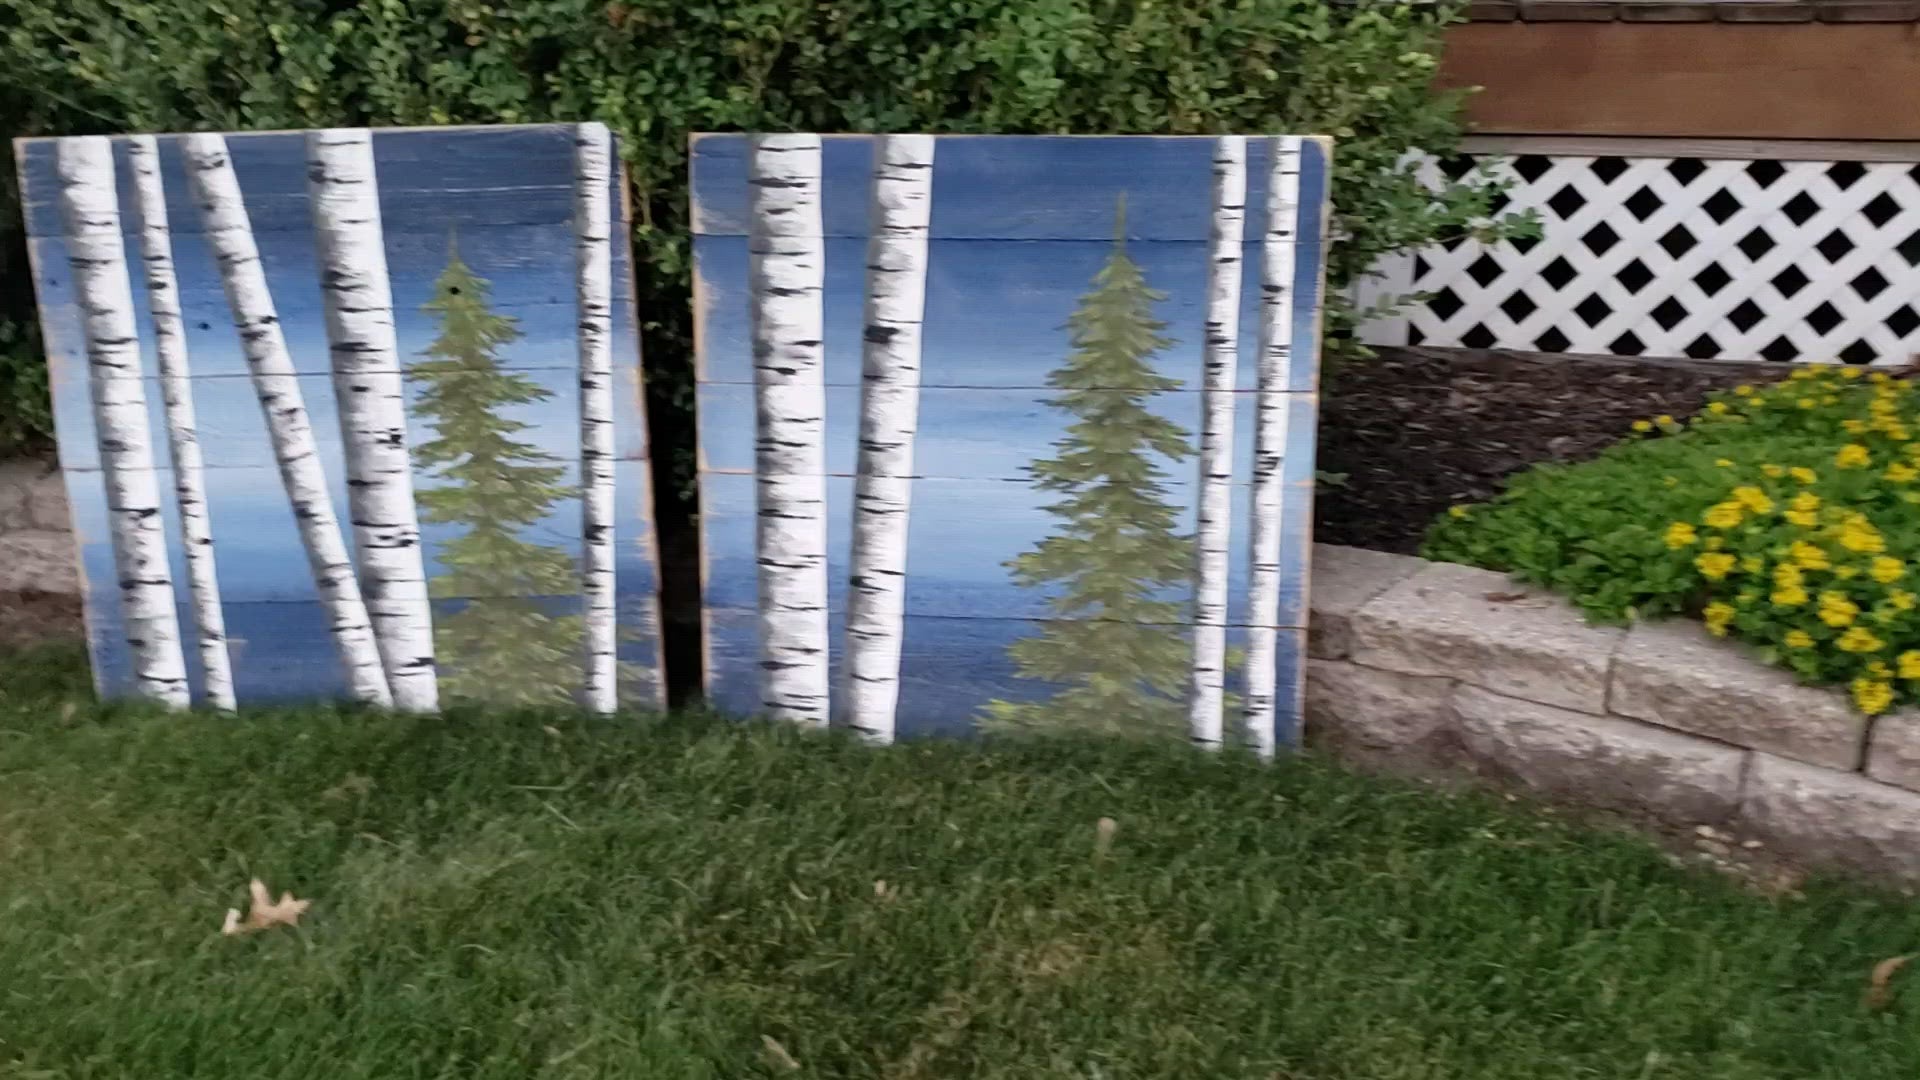 Sky blue white birch Painting with pine trees on Pallet wood, 2 Piece set, Hand Painted aspen trees, couch artwork